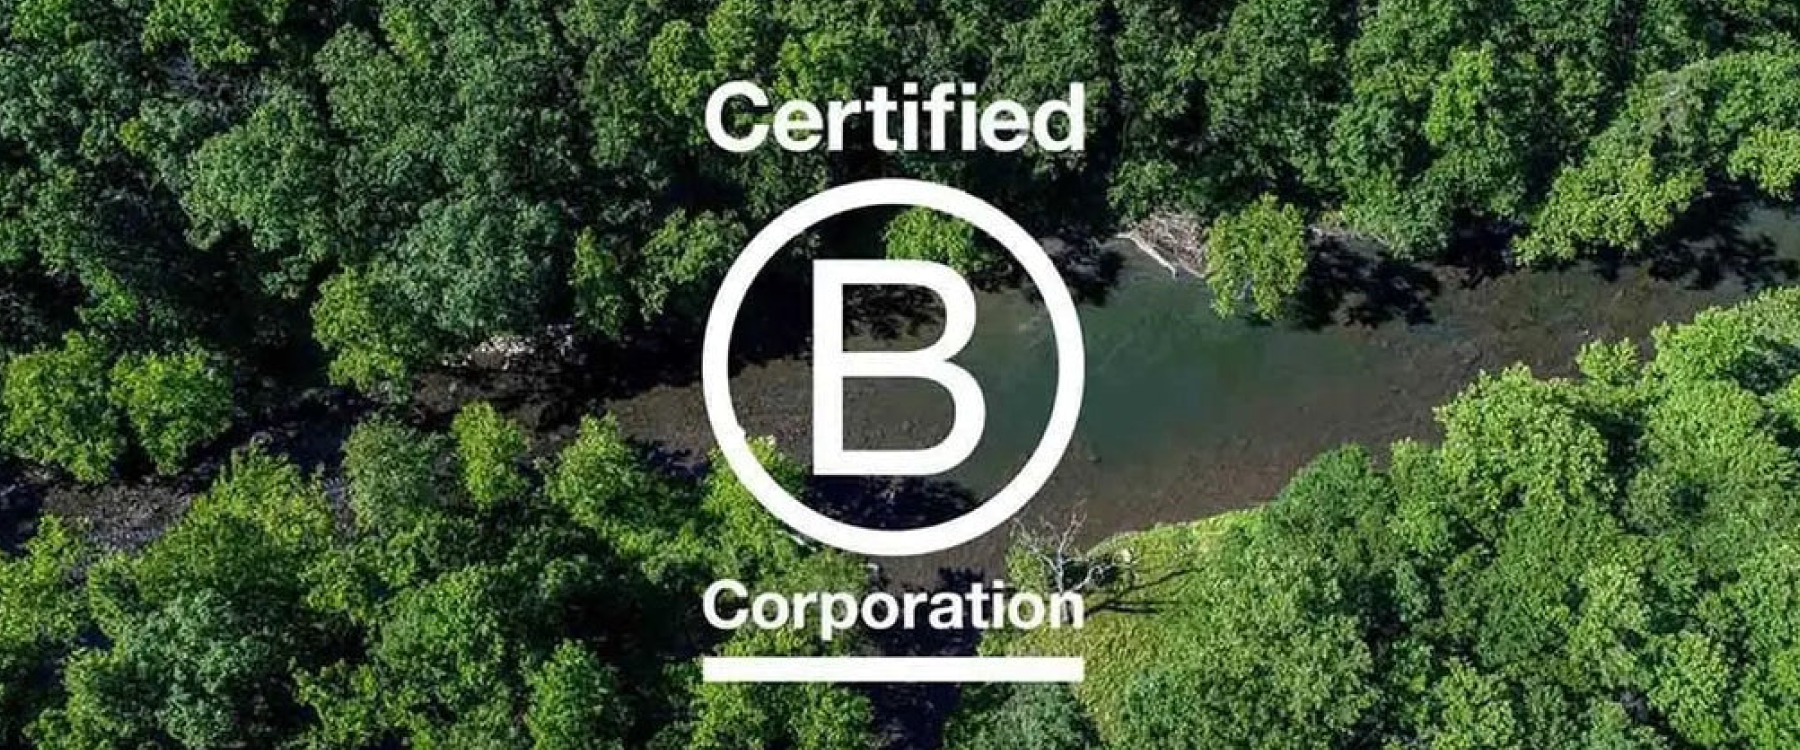 We Are a B-Corp - What That Means & Why We Do It